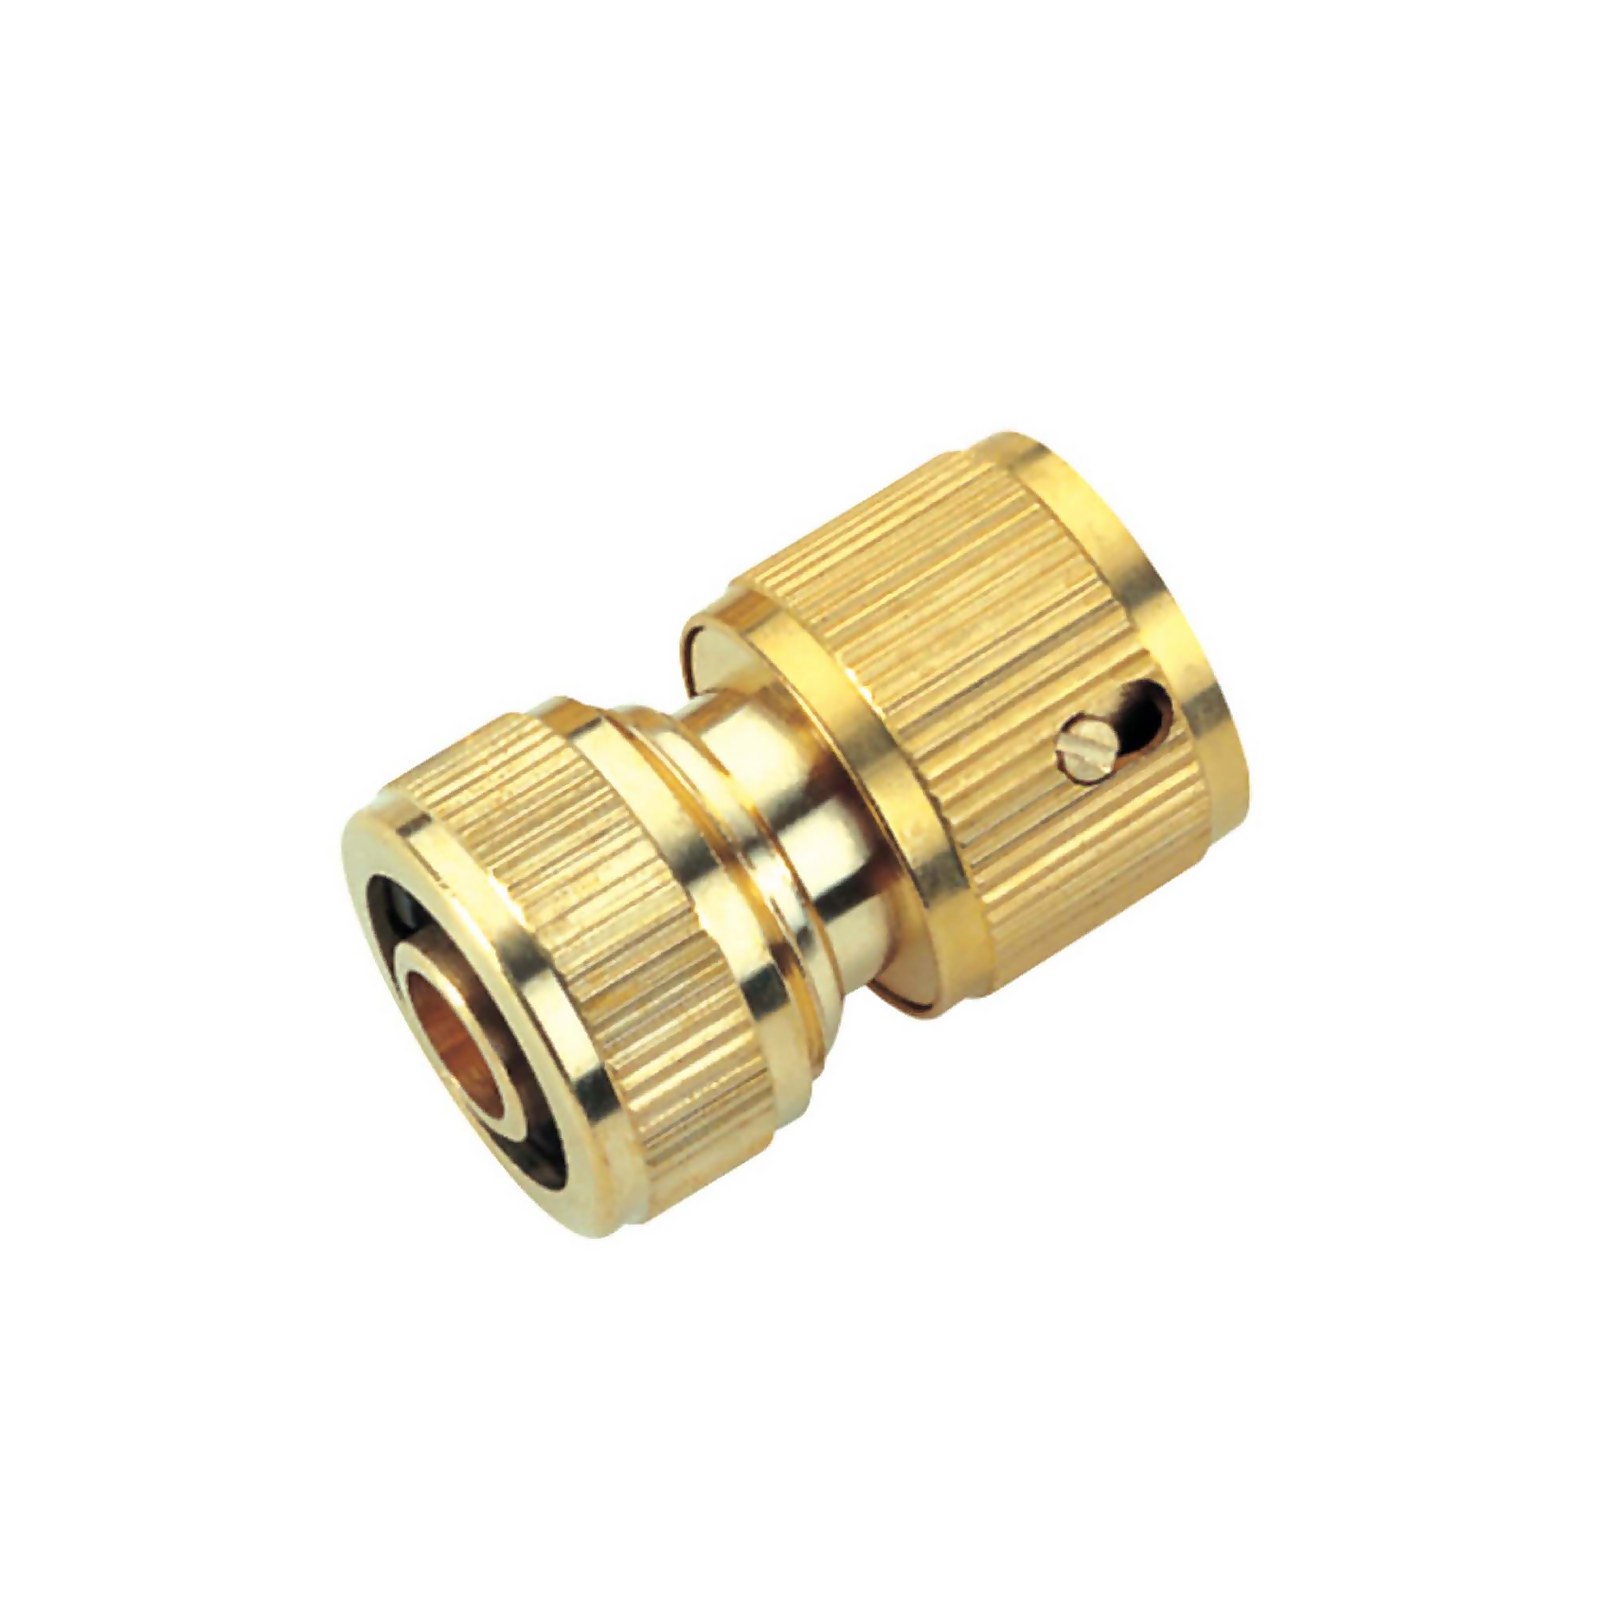 Photo of Hb Brass Waterstop Hose Quick Connector